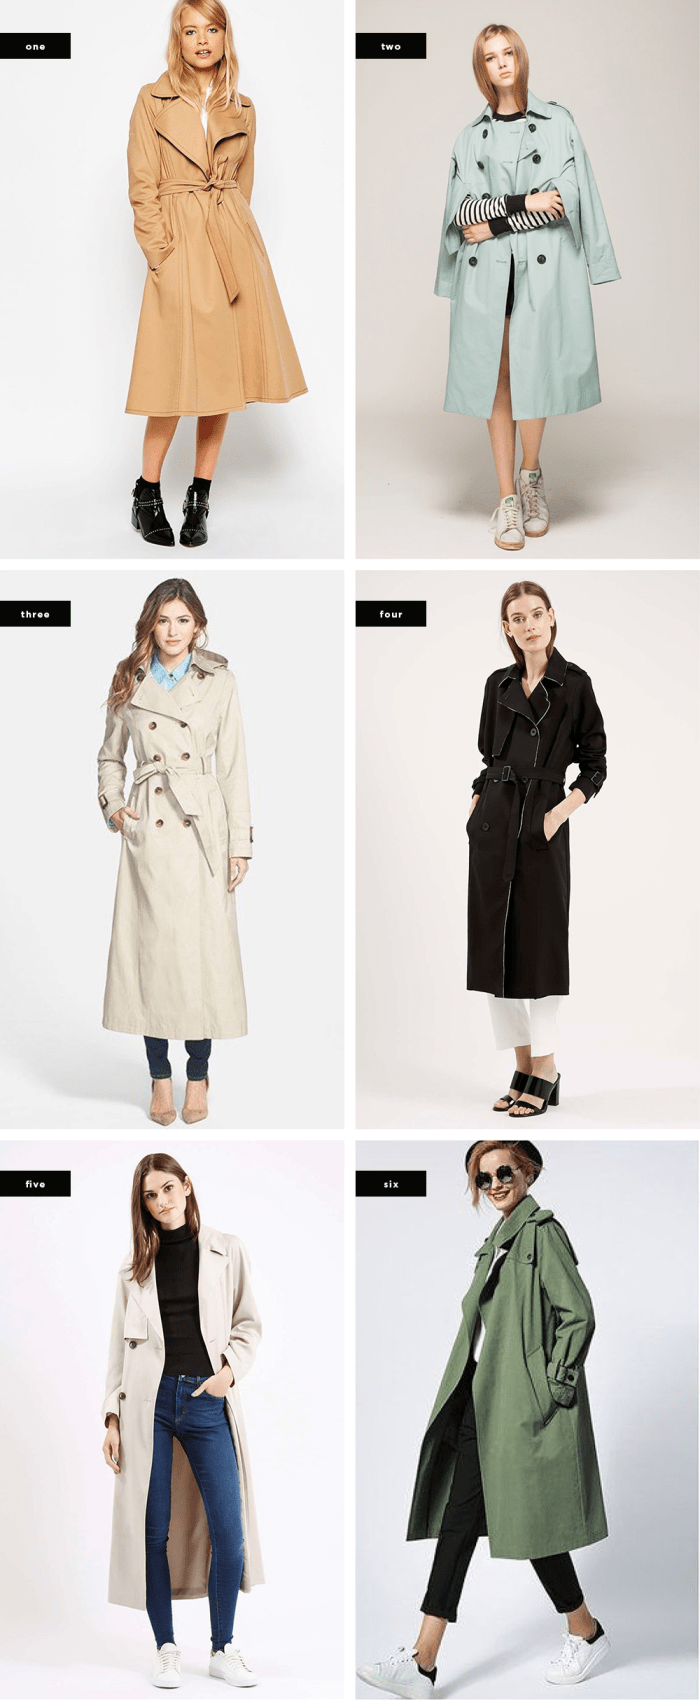 Stylish Trench Coats That Are Great Fall Wardrobe Staples - Verily